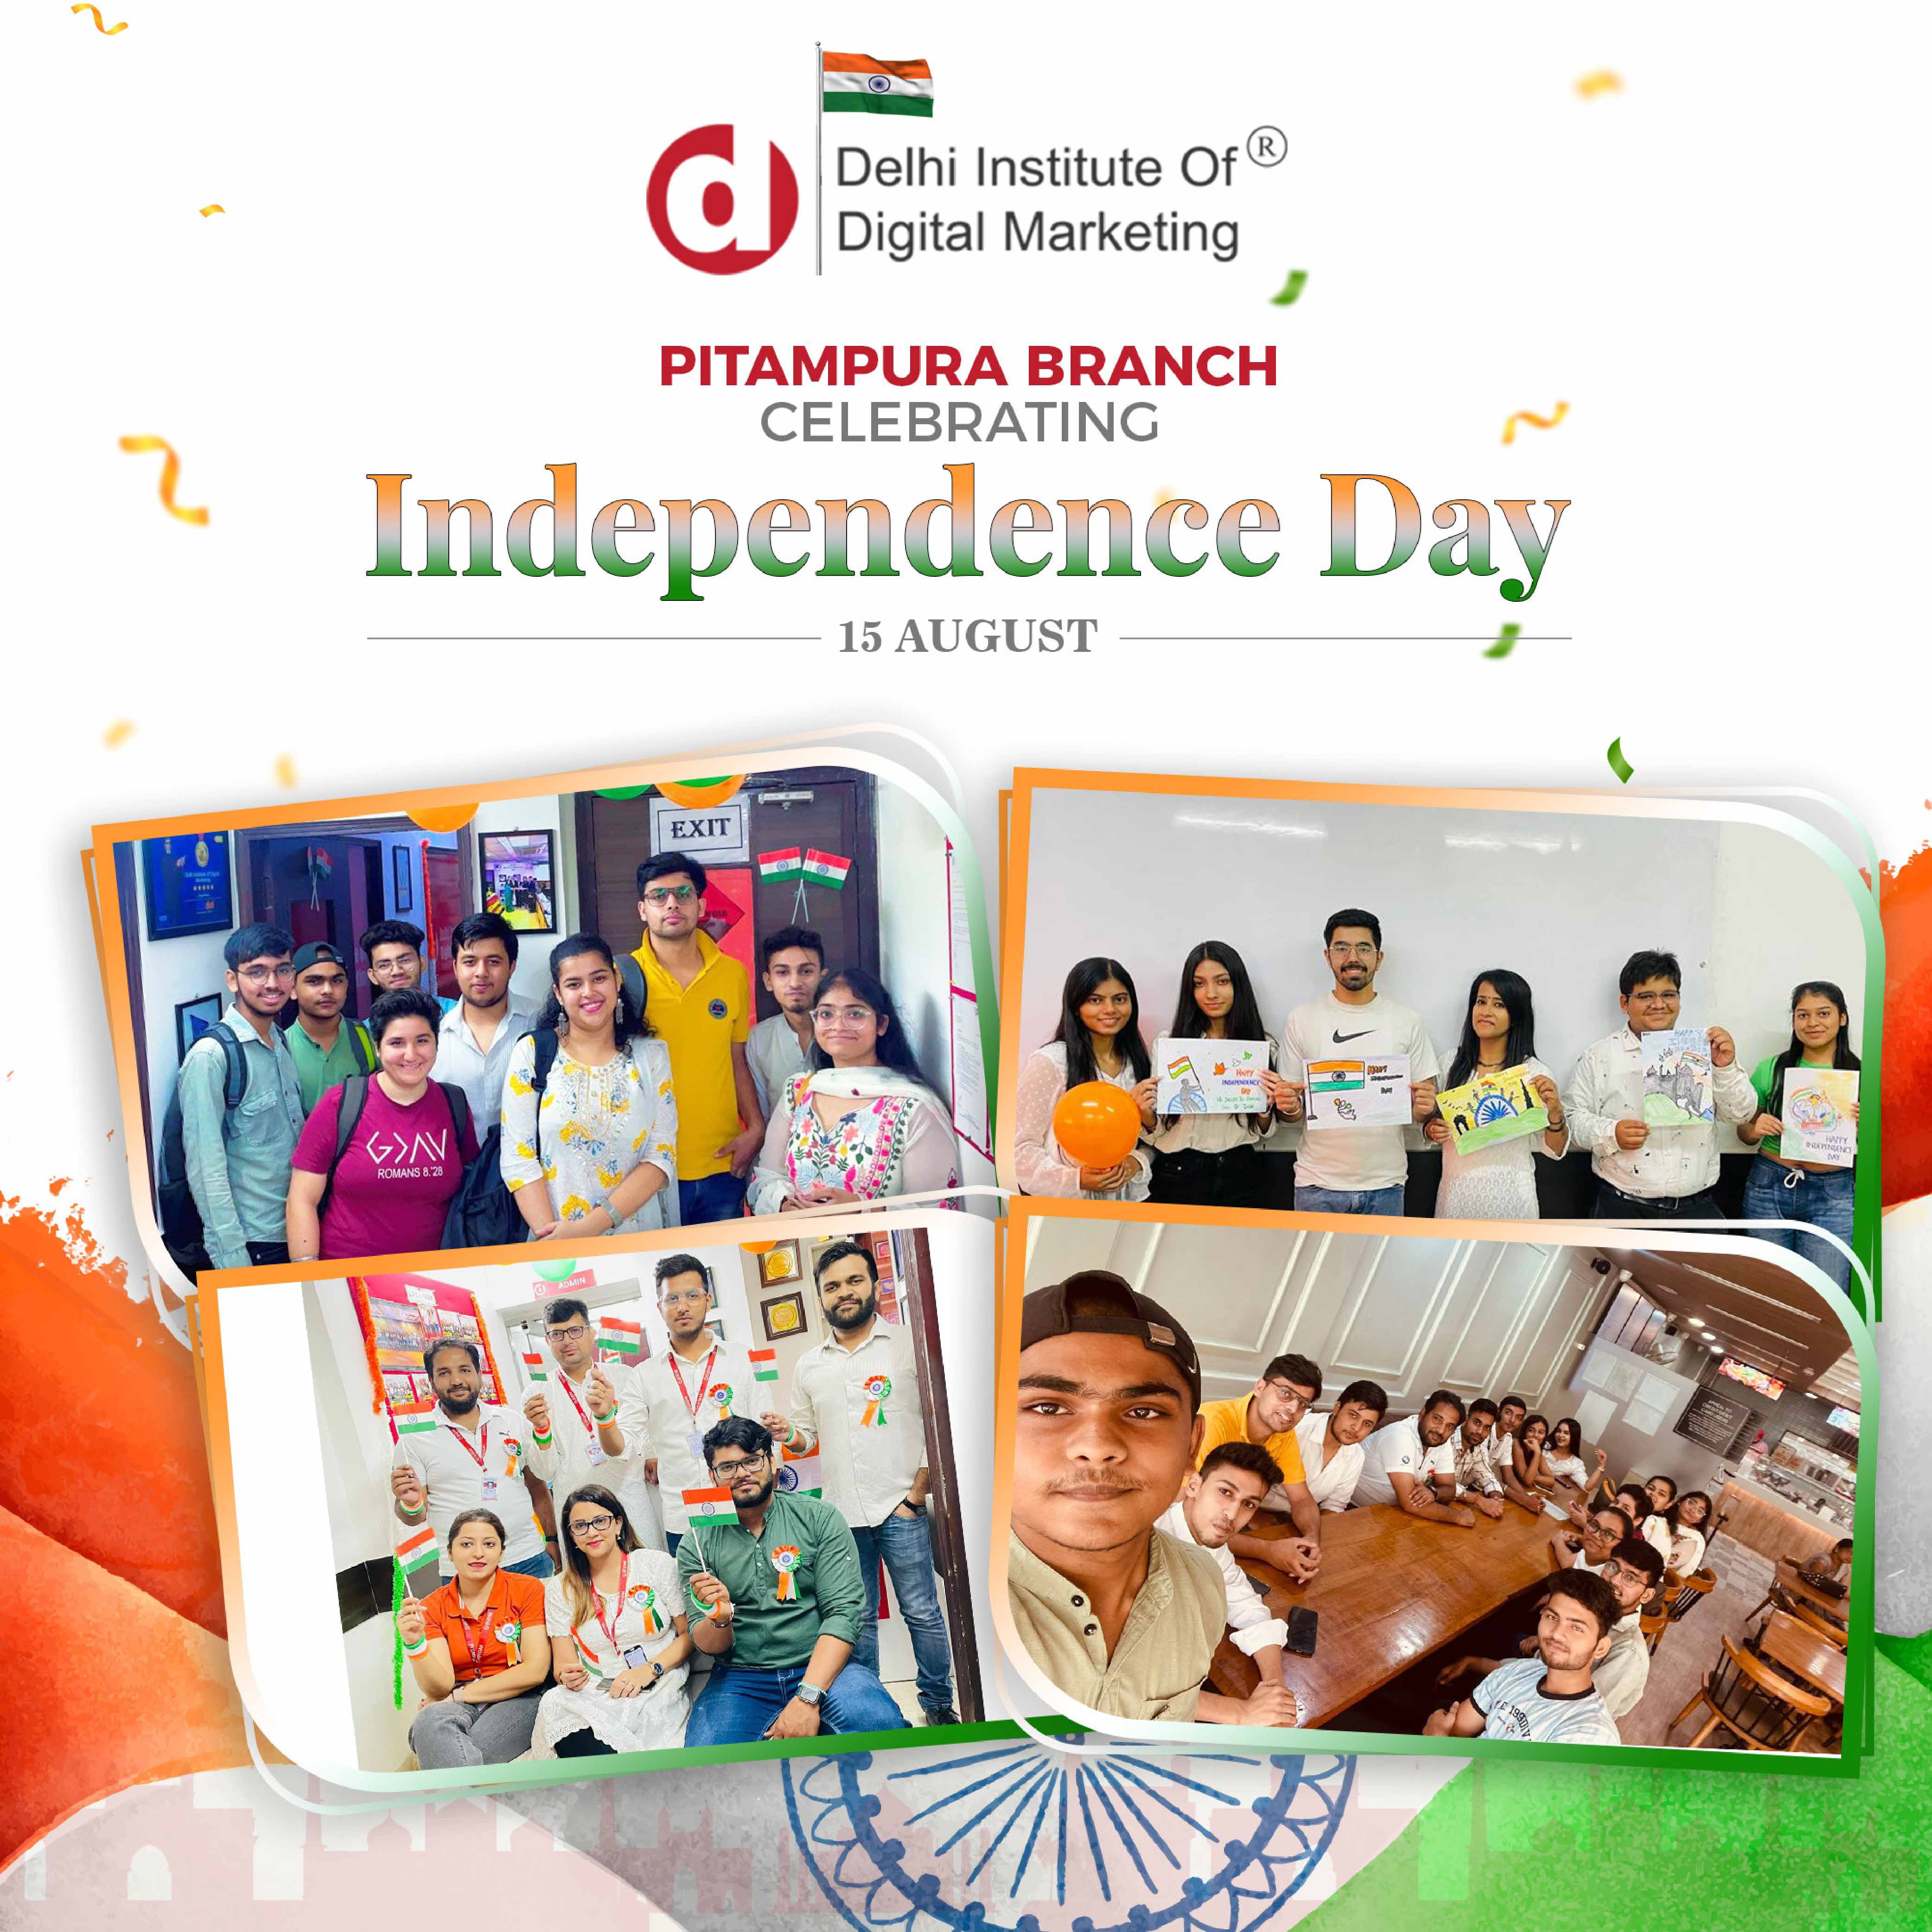 DIDM Pitampura Branch is celebrating its 77th Independence Day